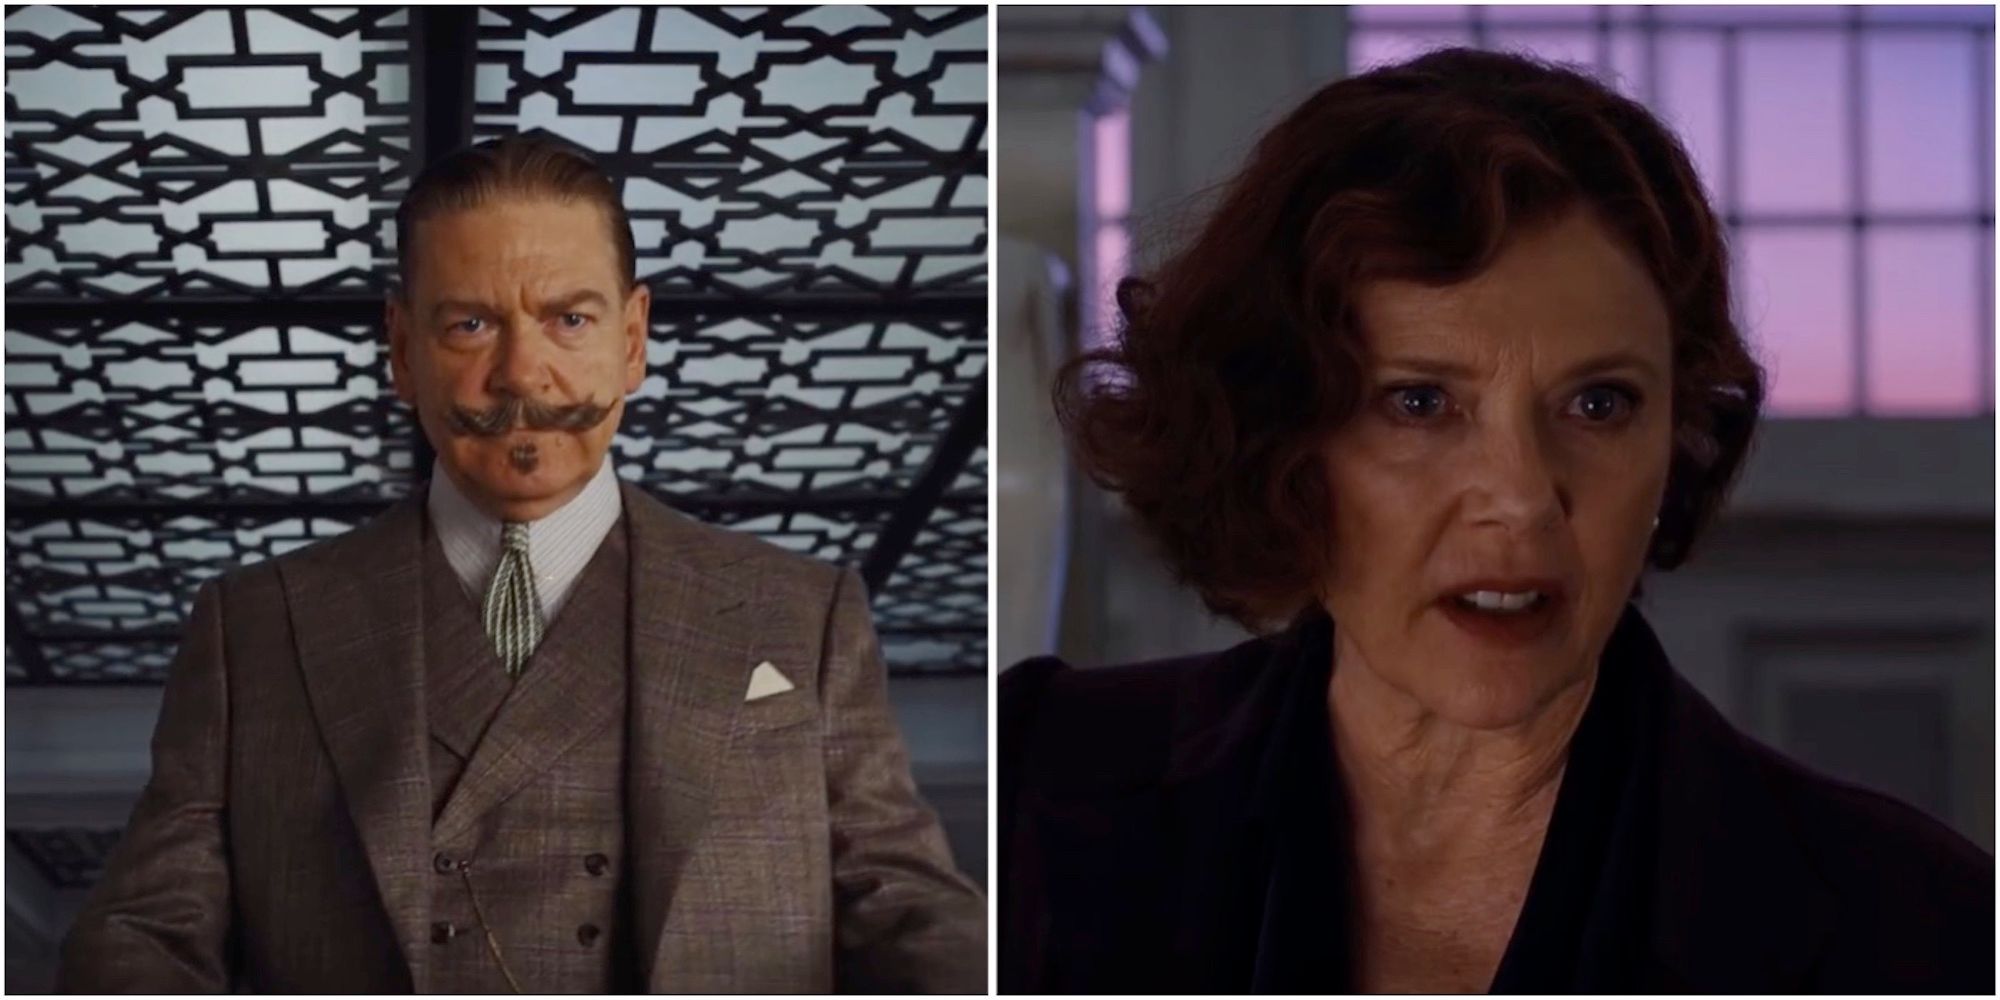 Poirot and Euphemia from Death on the Nile